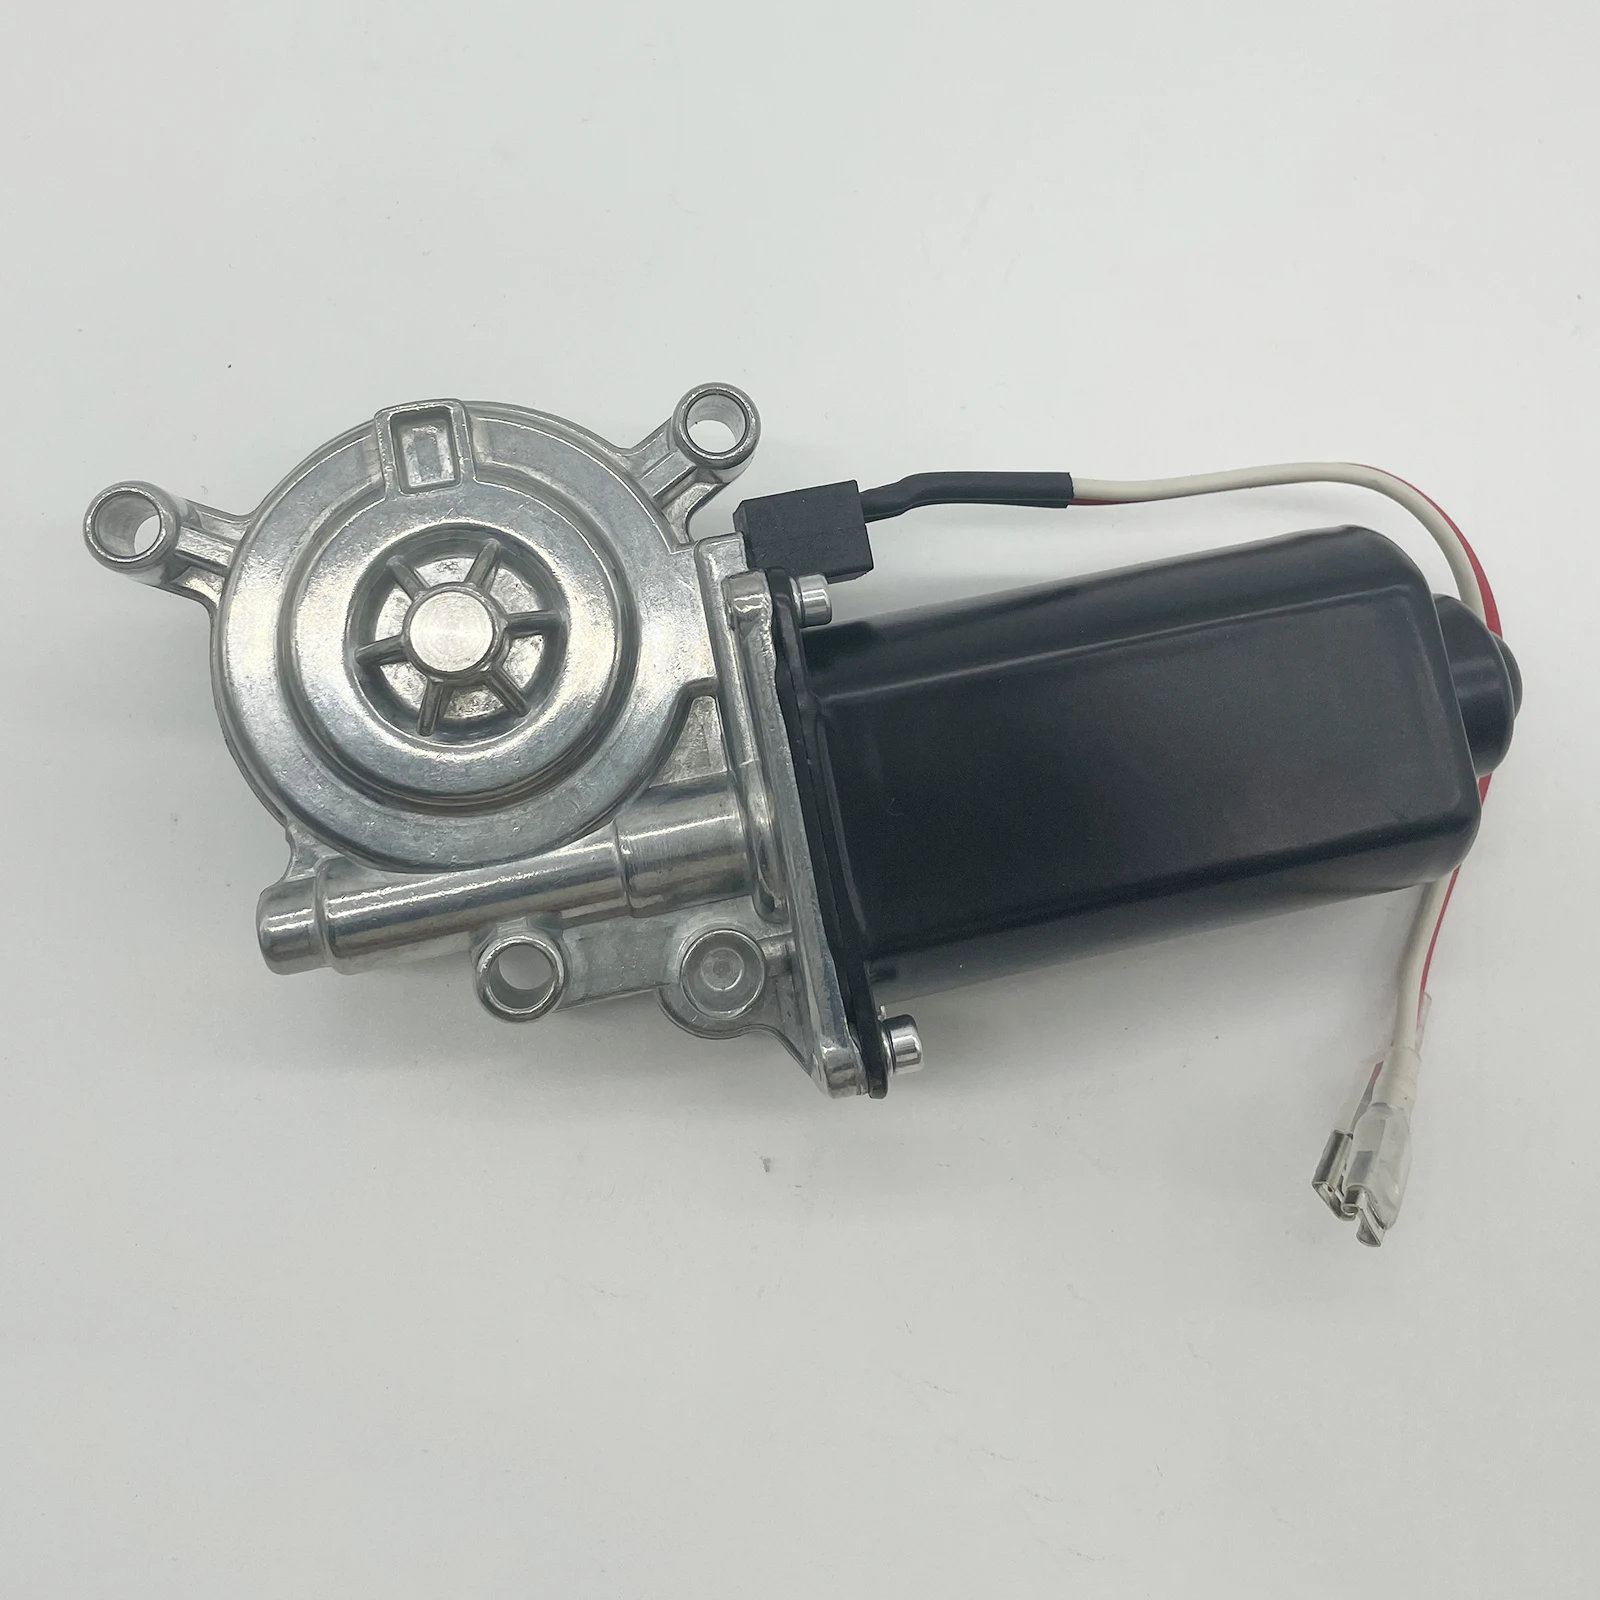 RV Motorhome Trailer Power Awning Replacement Motor Assembly 12-Volt DC 75-RPM Compatible with Lippert 266149 373566